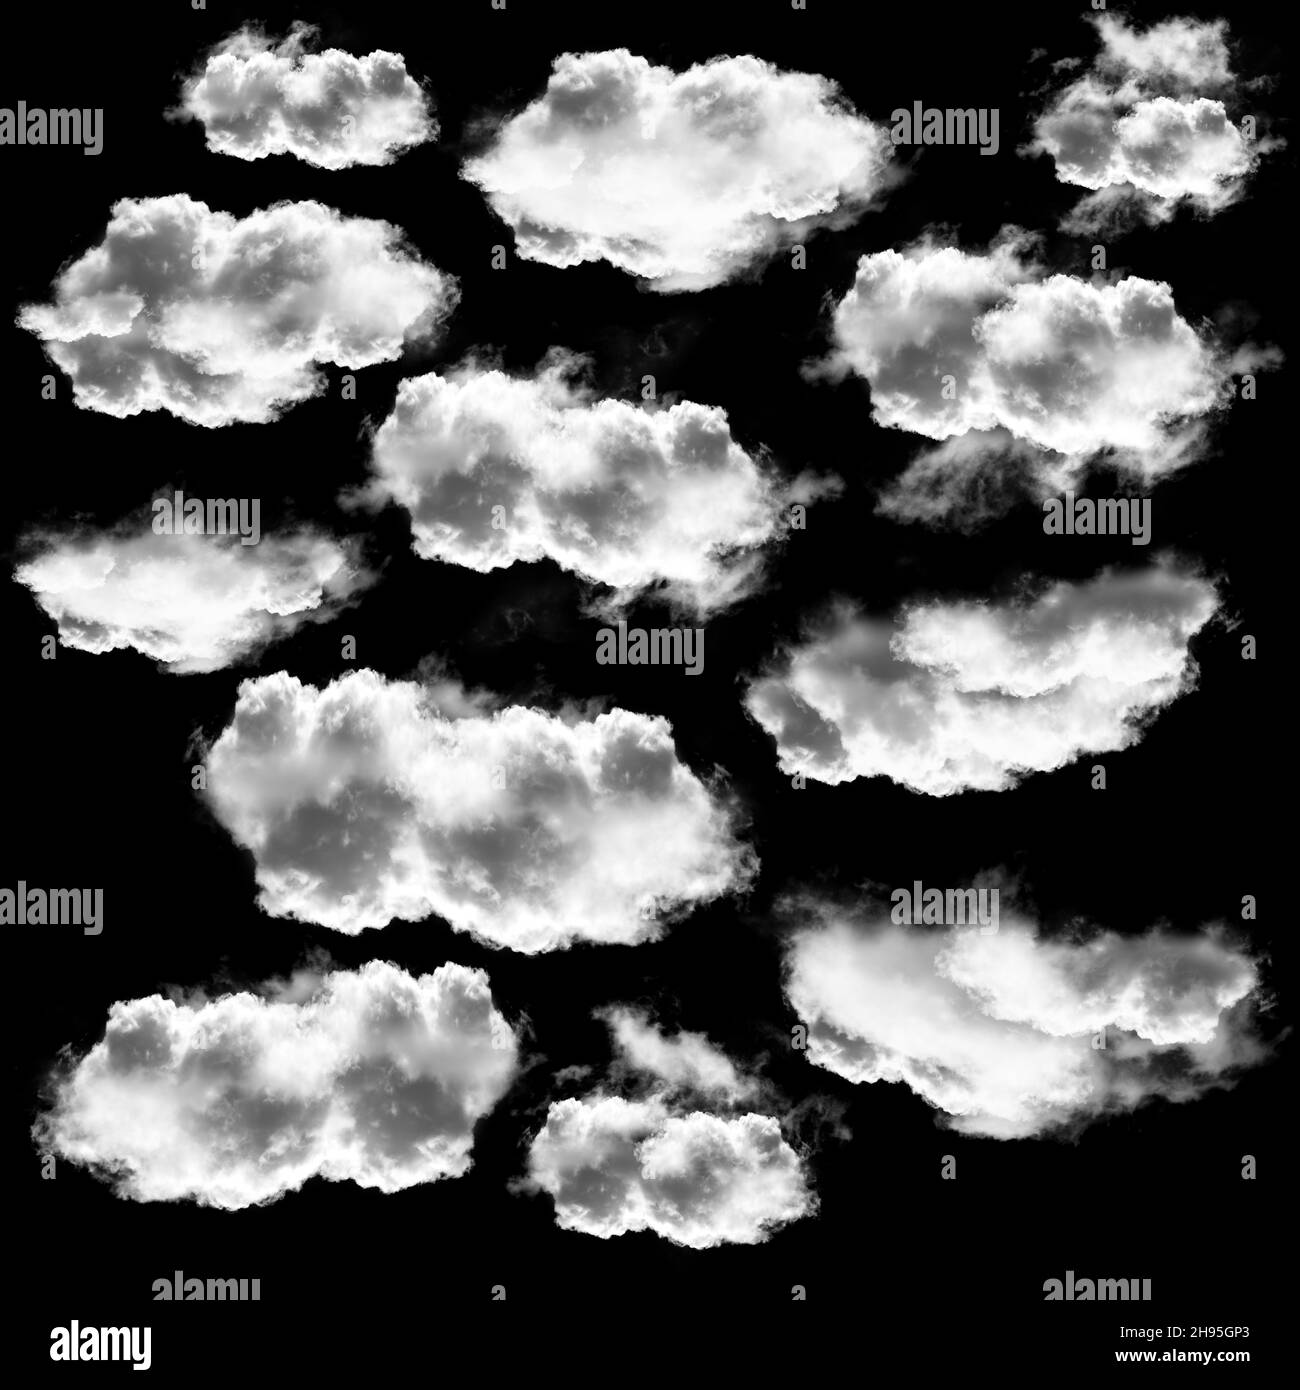 Clouds illustration Black and White Stock Photos & Images - Alamy